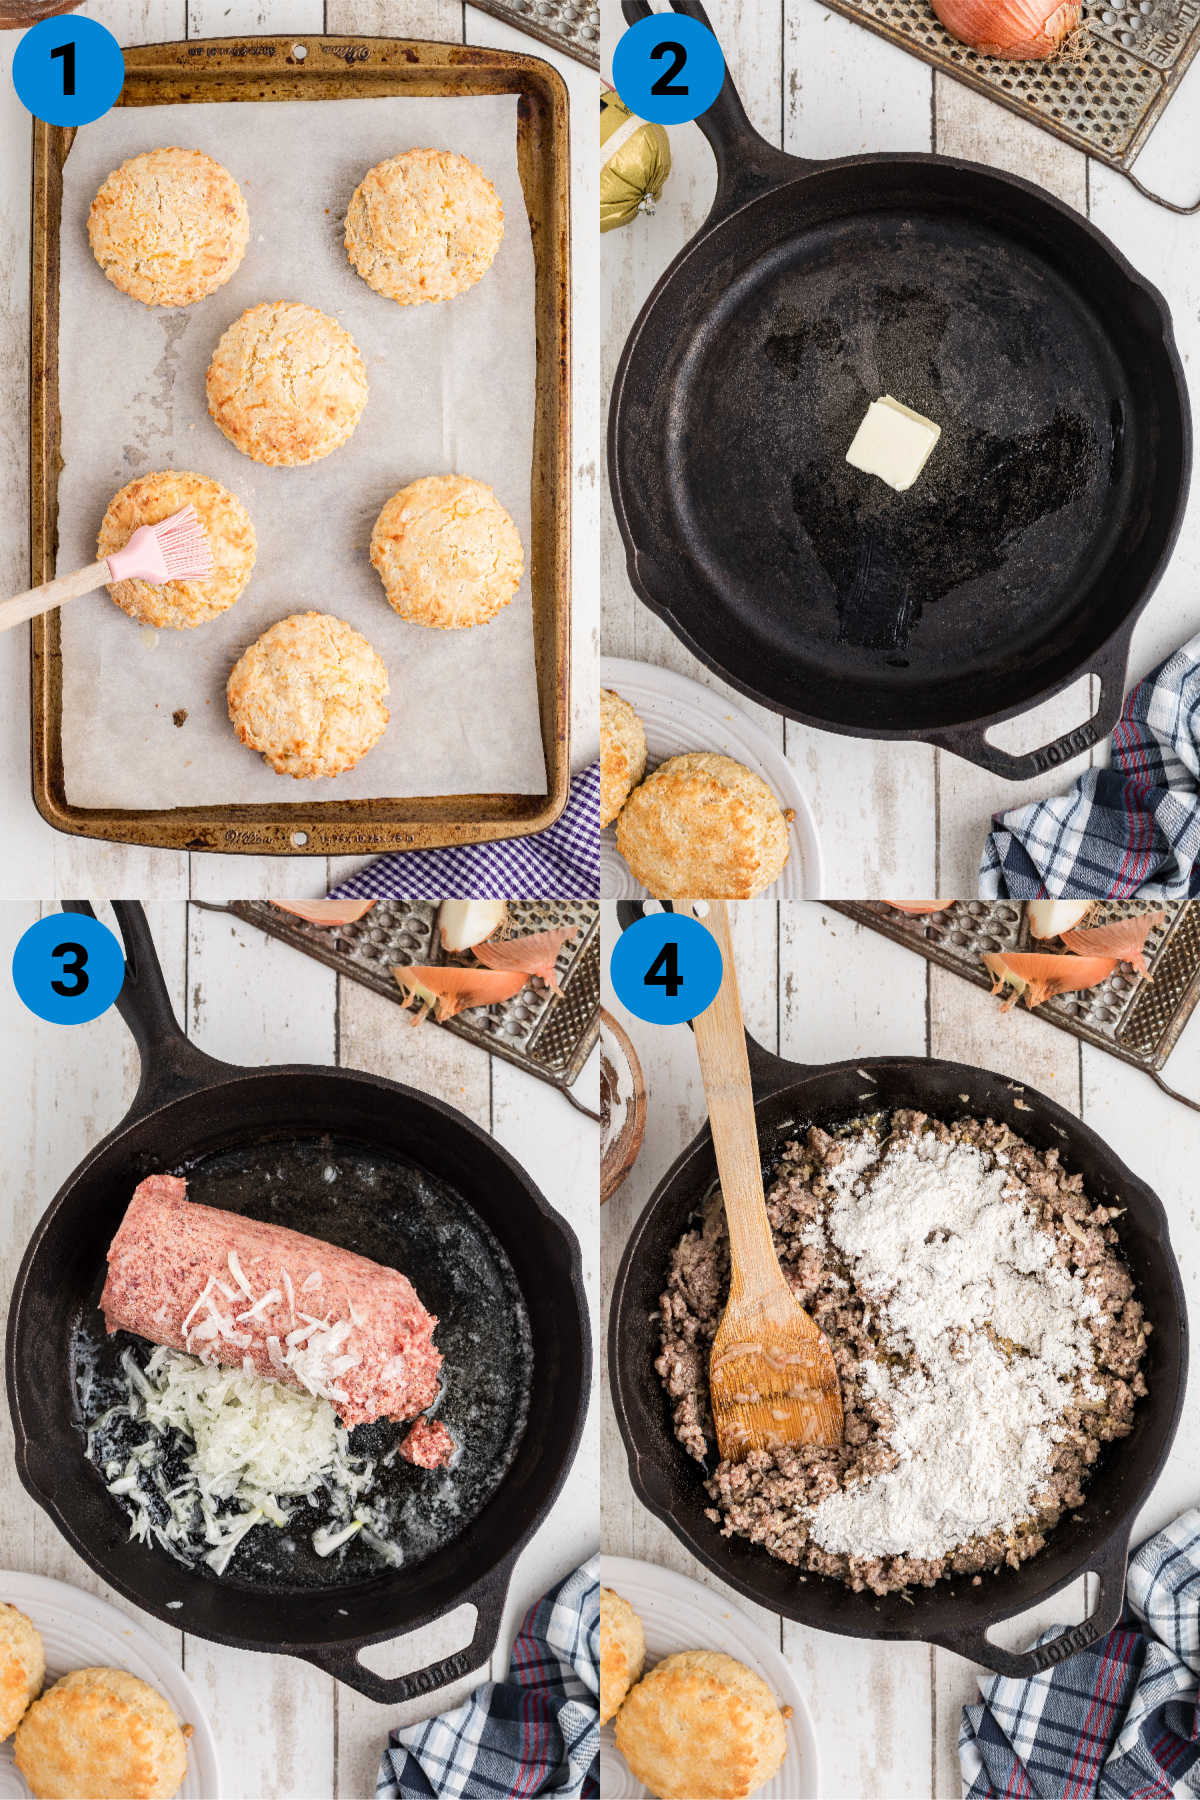 A collage of four images showing how to make biscuits and gravy, recipe steps 1-4.